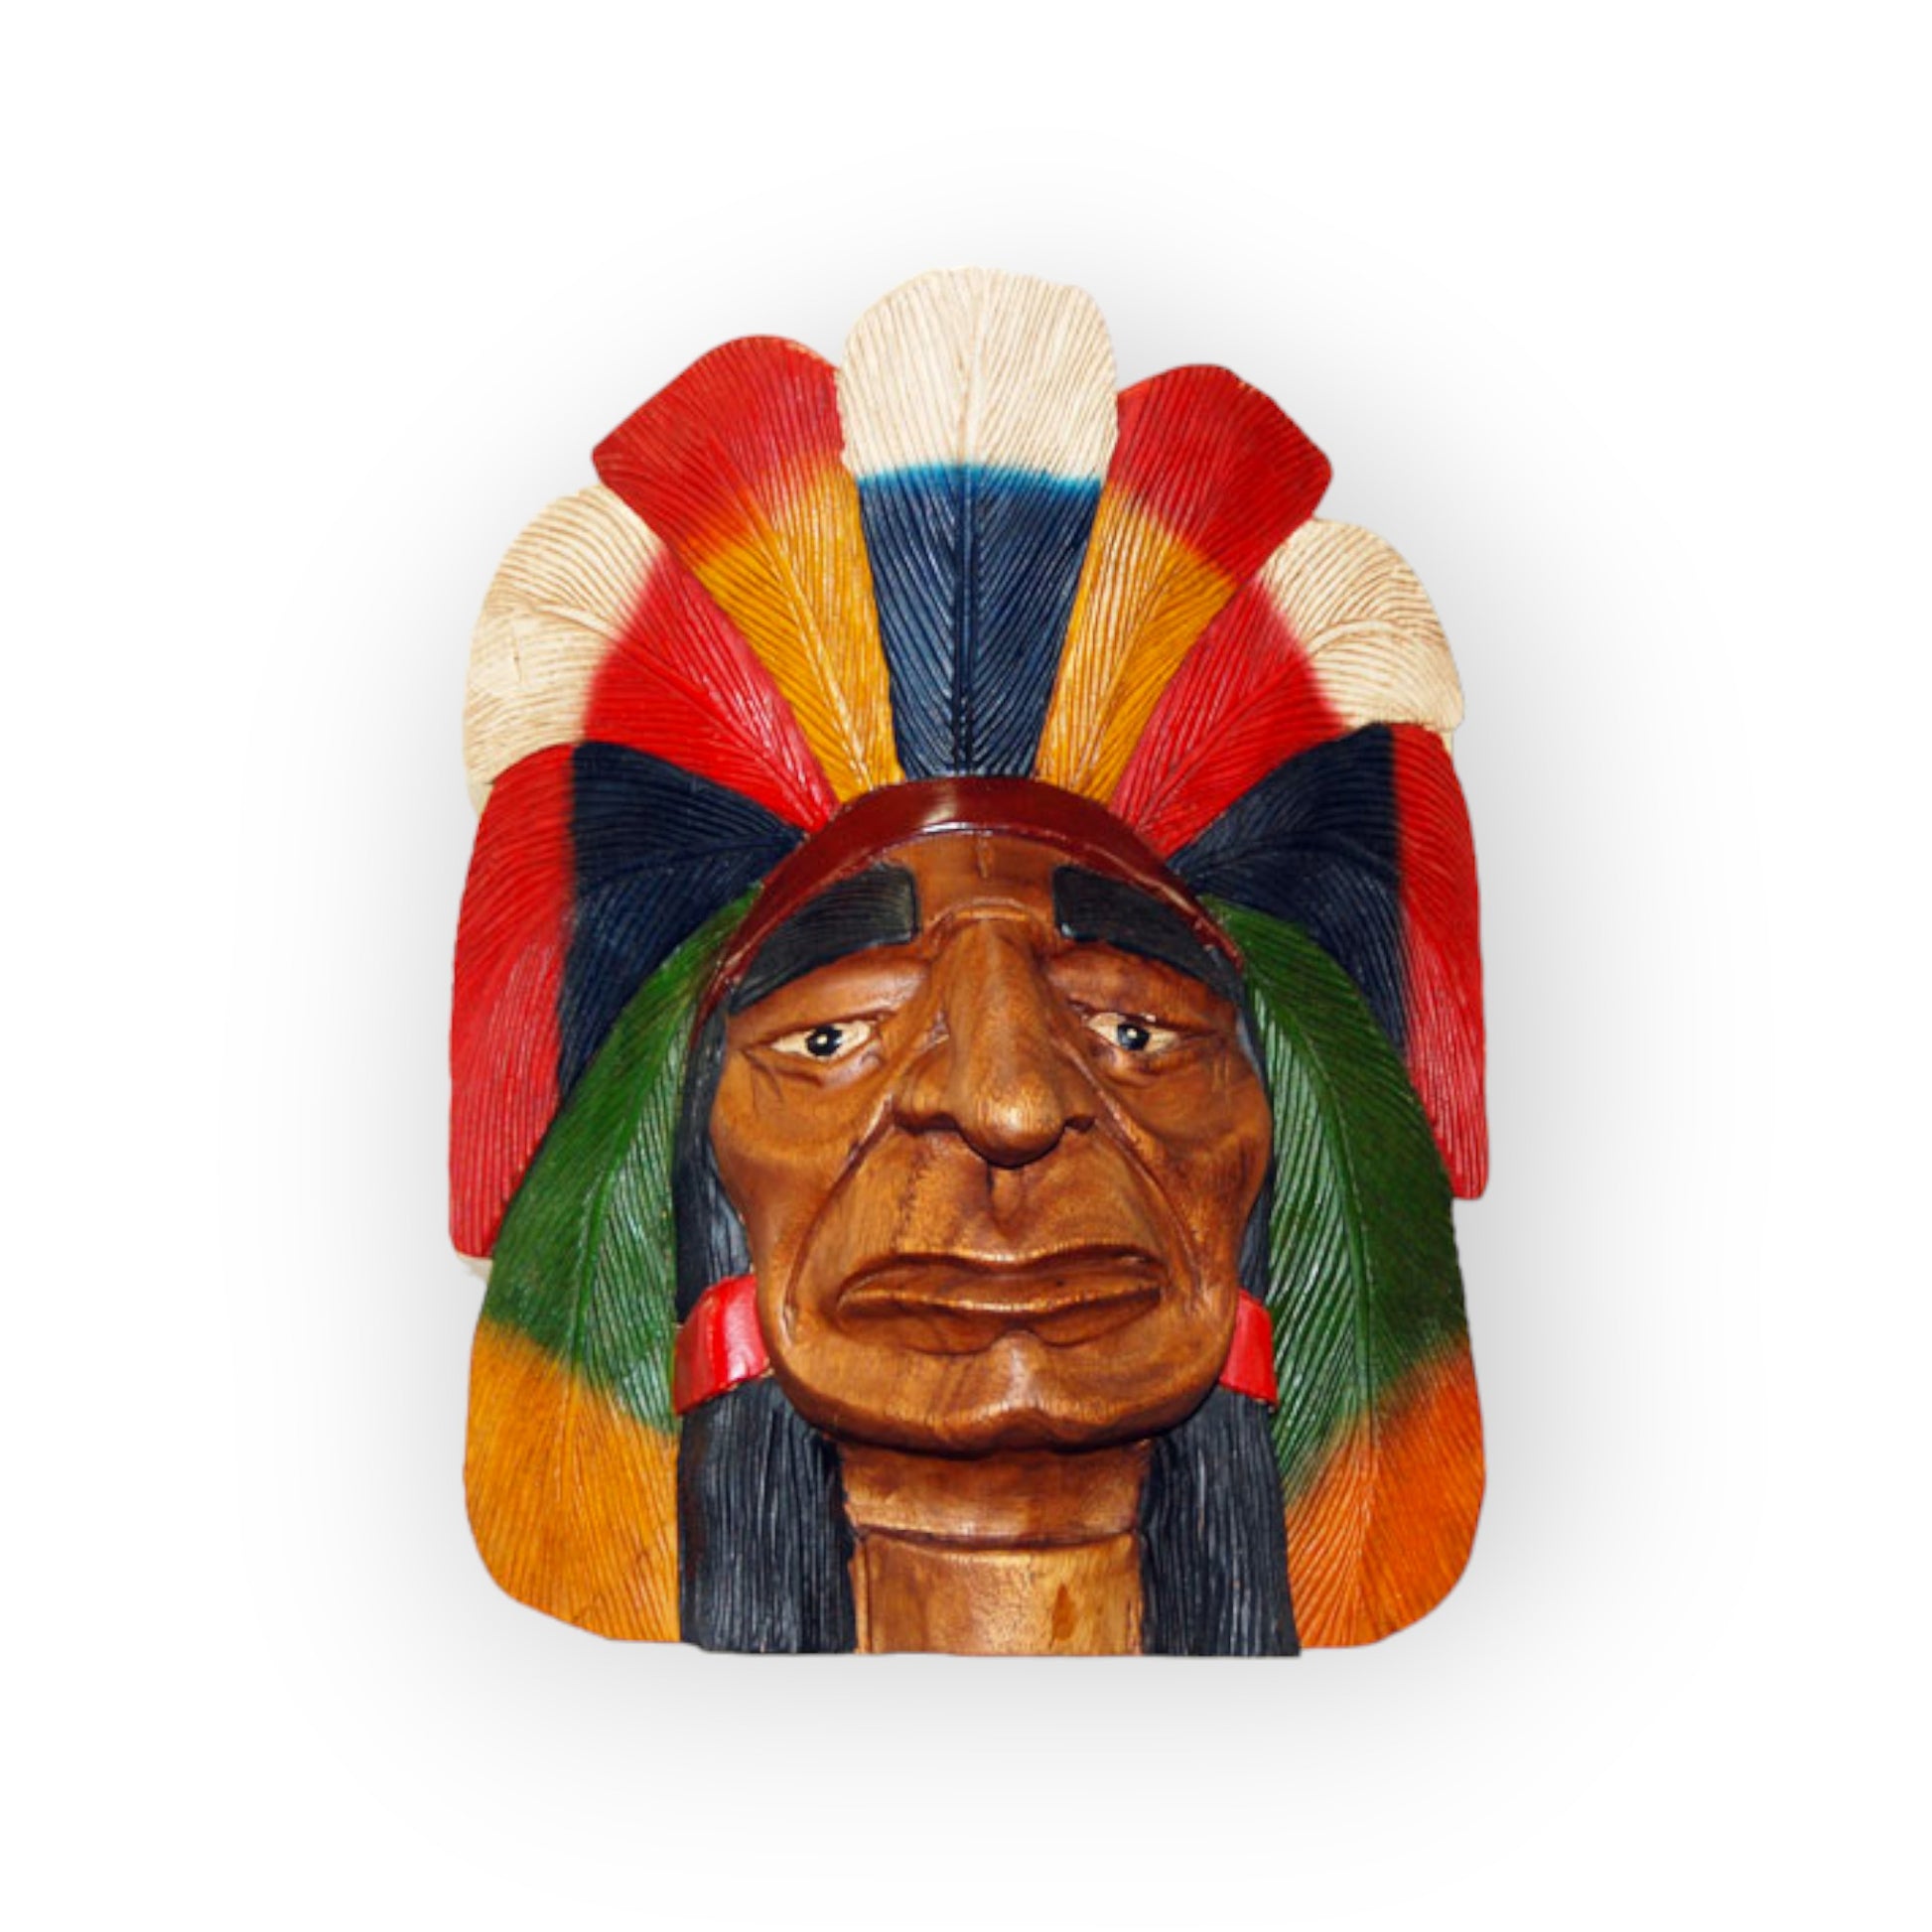 Wood Indian Chief Carved Head for Table Top Display